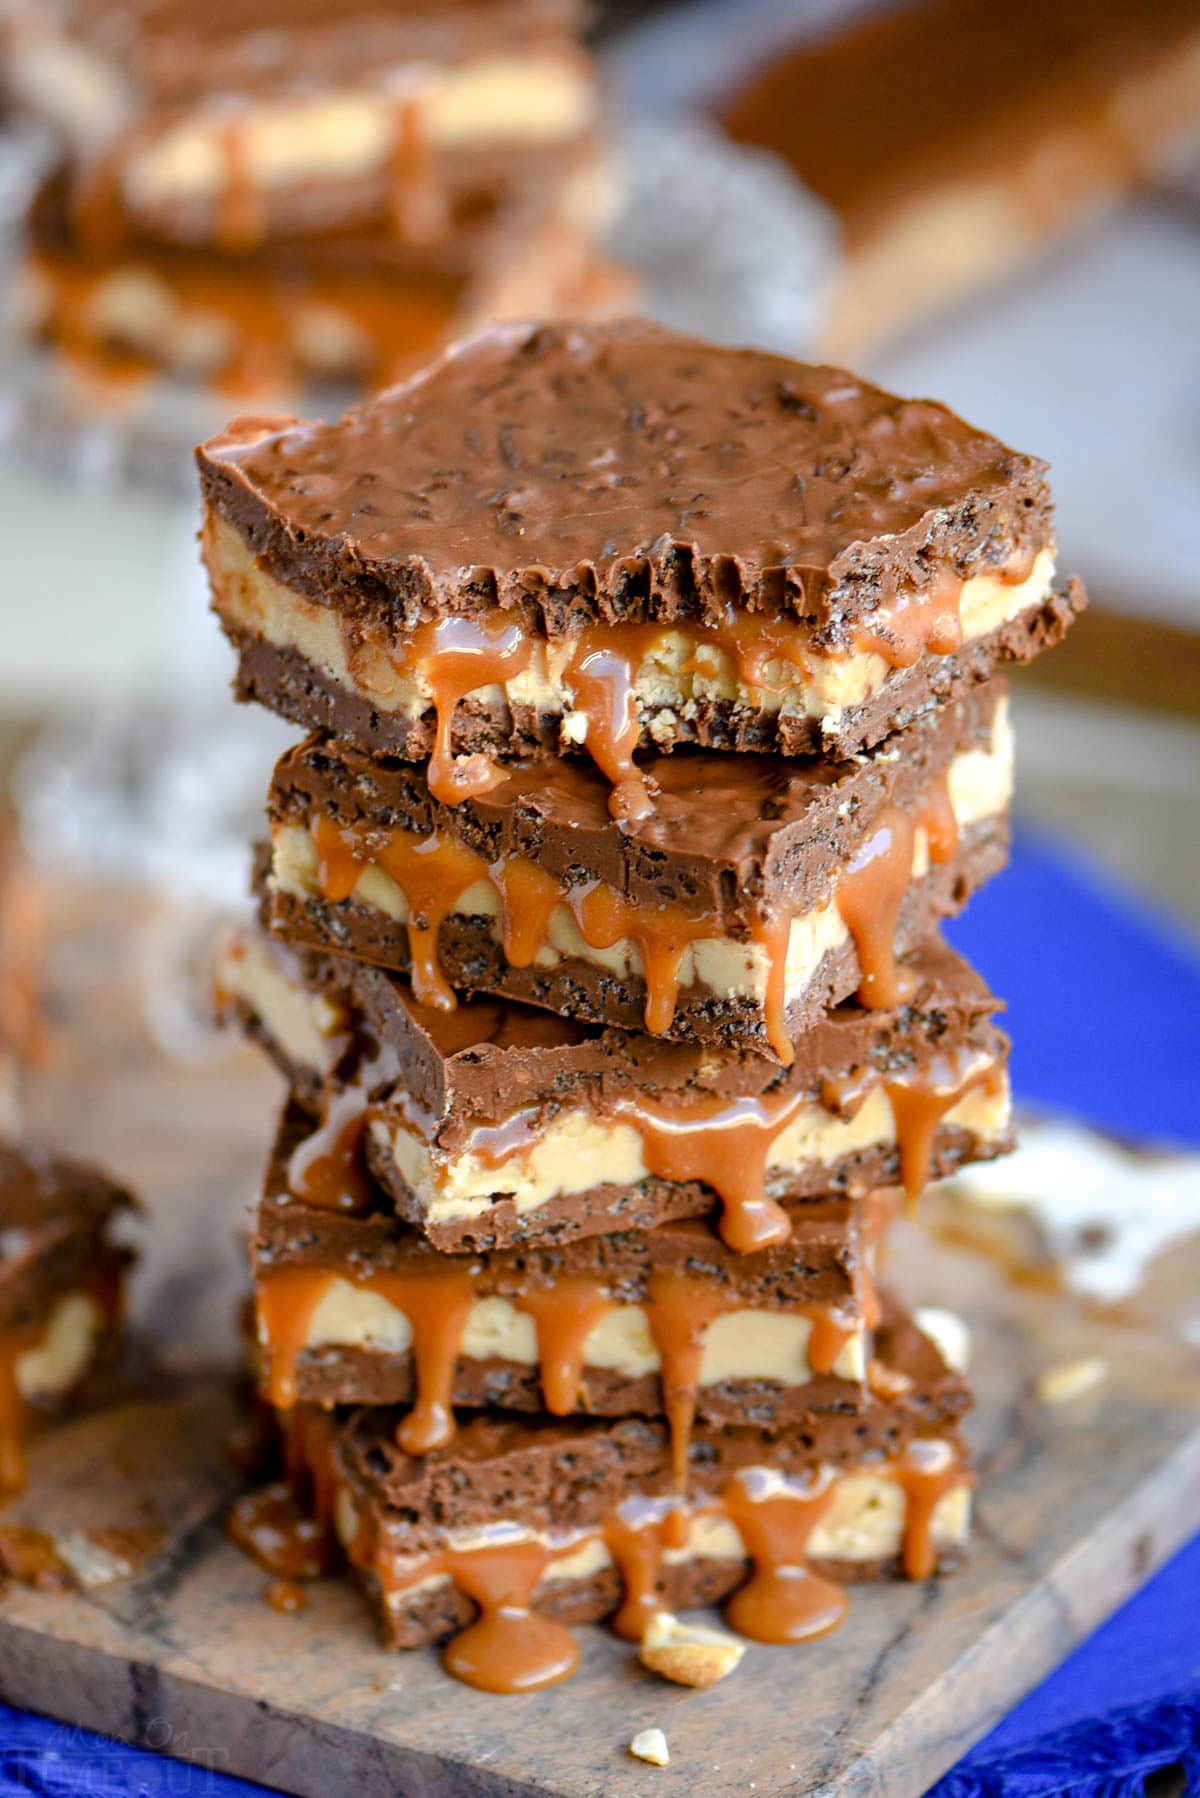 stack of bars with nougat, caramel and crispy chocolate layers. Top bar has a bite taken.